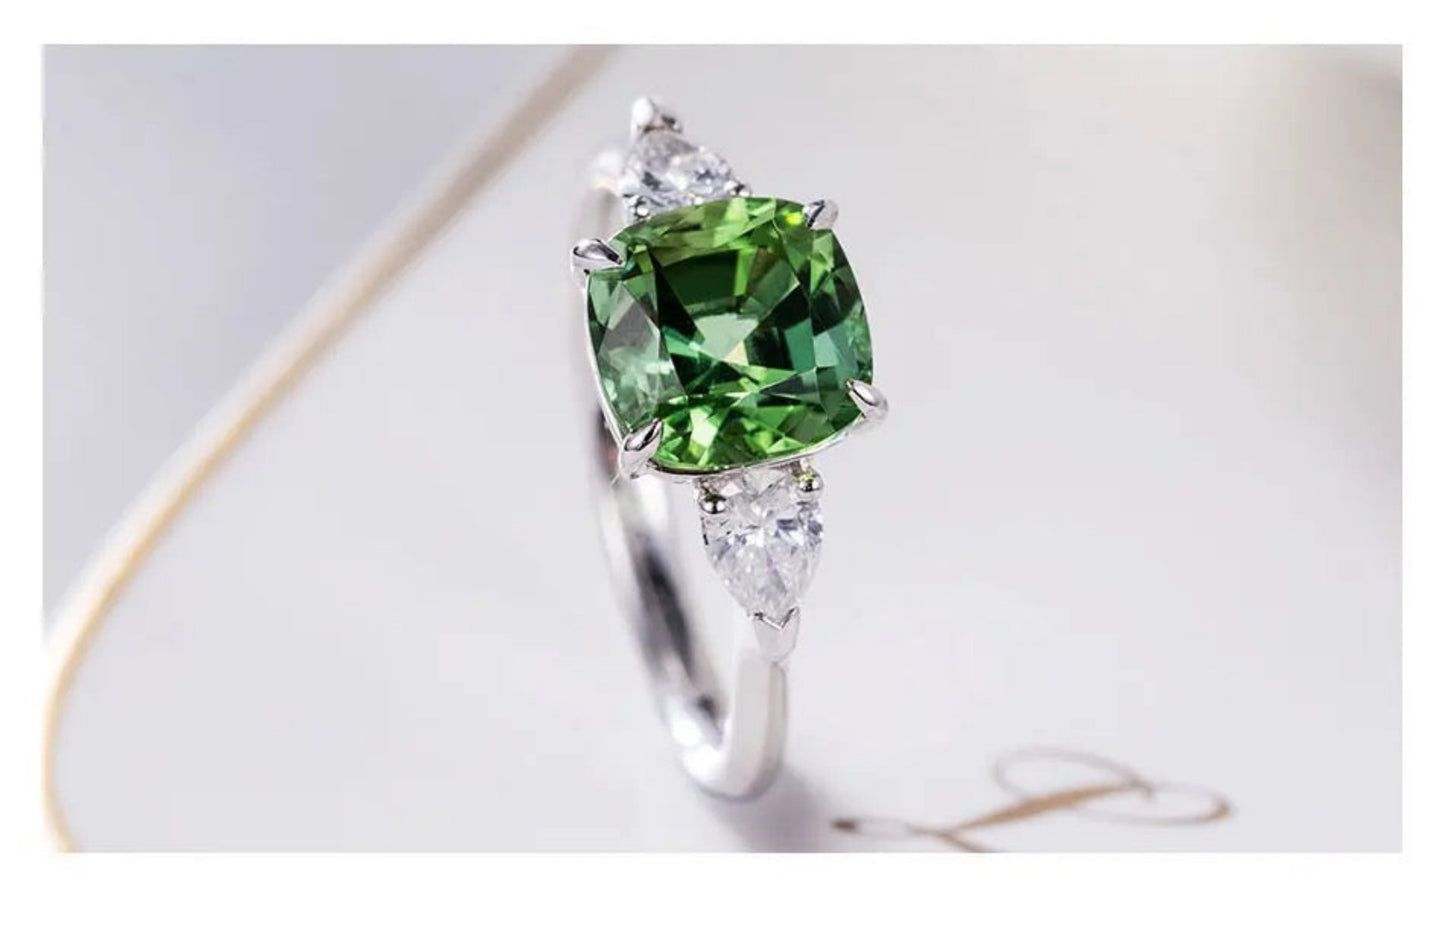 Emerald Square Adjustable Ring (Artificial Silver Plated)